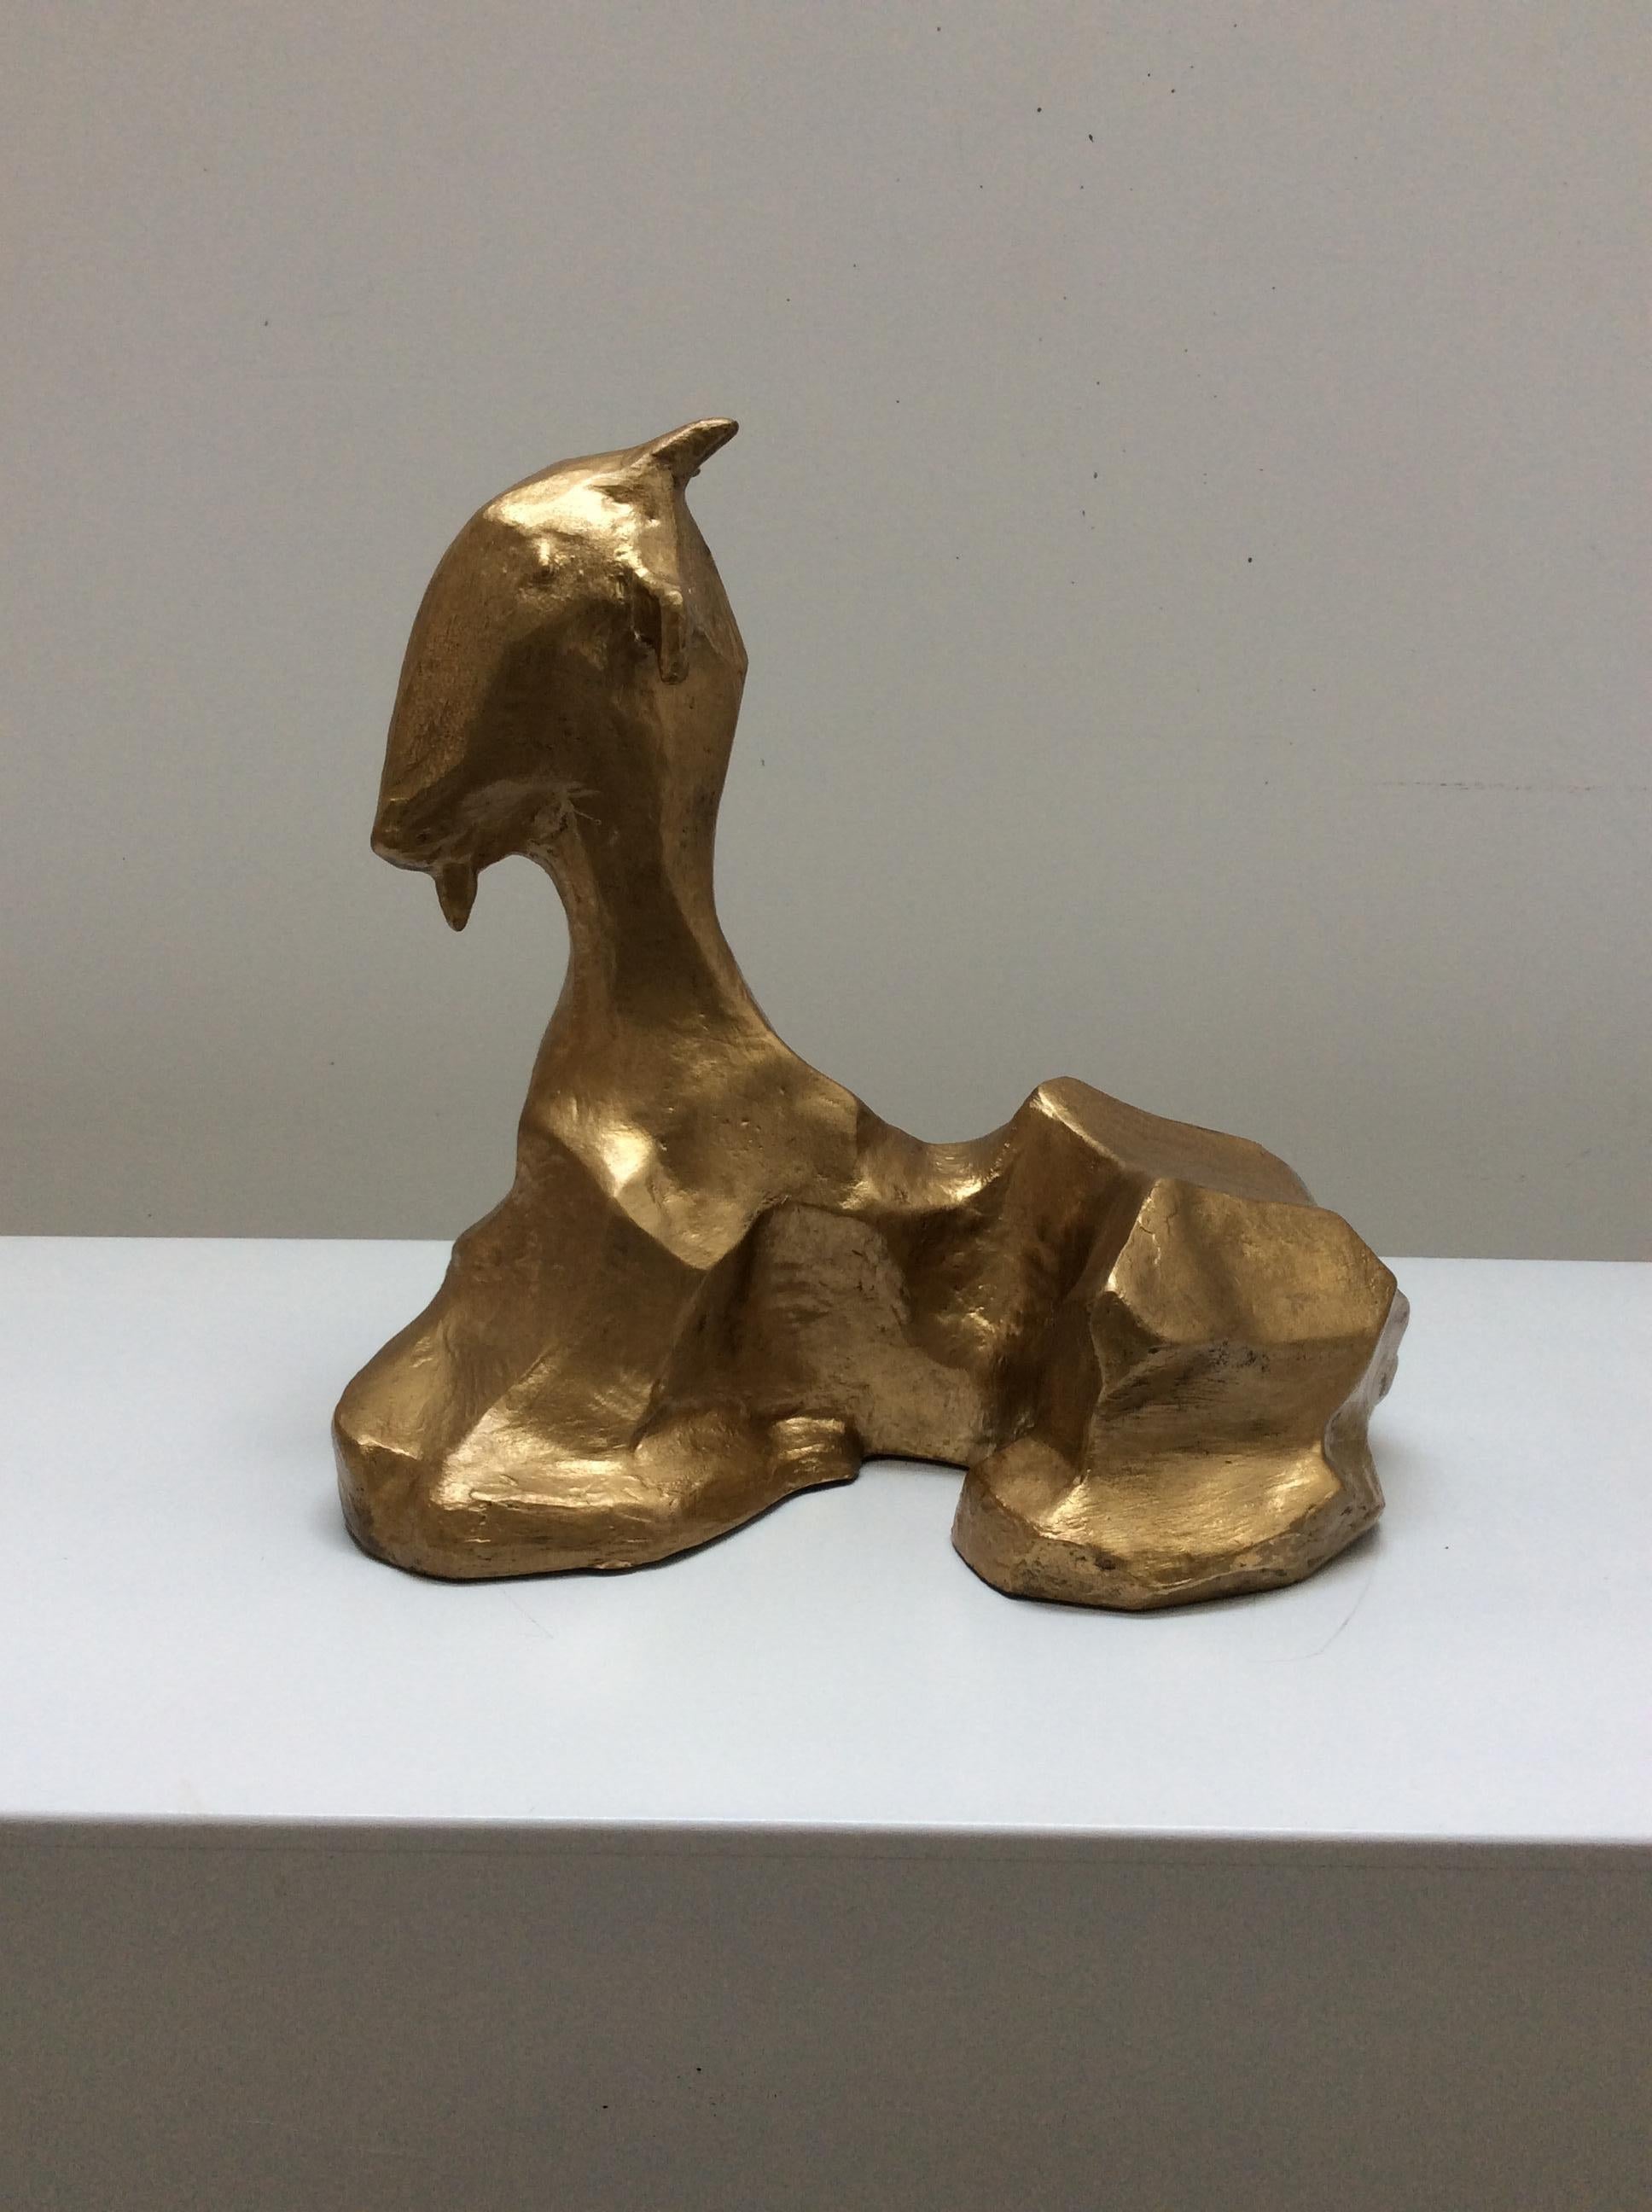 'Goat' bronze sculpture created by Studio Rinat Design, molded and cast in bronze in the lost wax process. The sculpture is available to order in other patinas and in gold finish.
Limited edition
Available now
